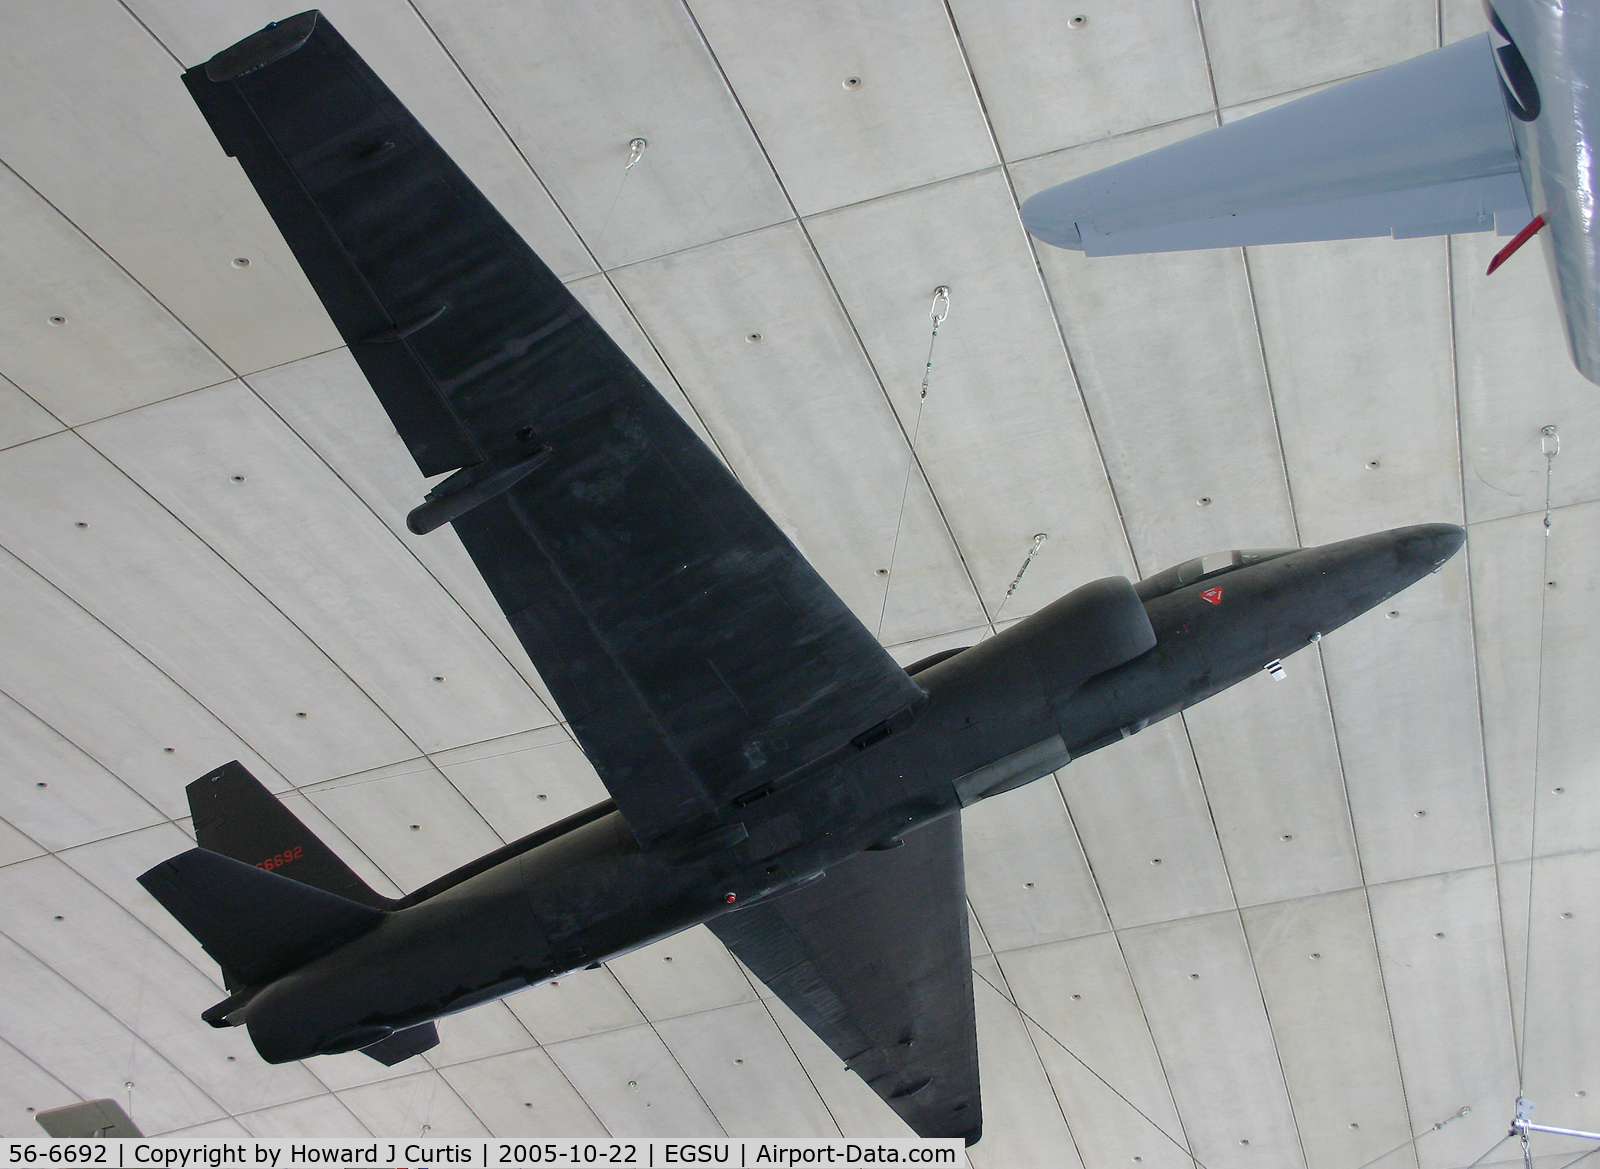 56-6692, Lockheed U-2CT C/N 359, Hanging from the ceiling of the American Air Museum.